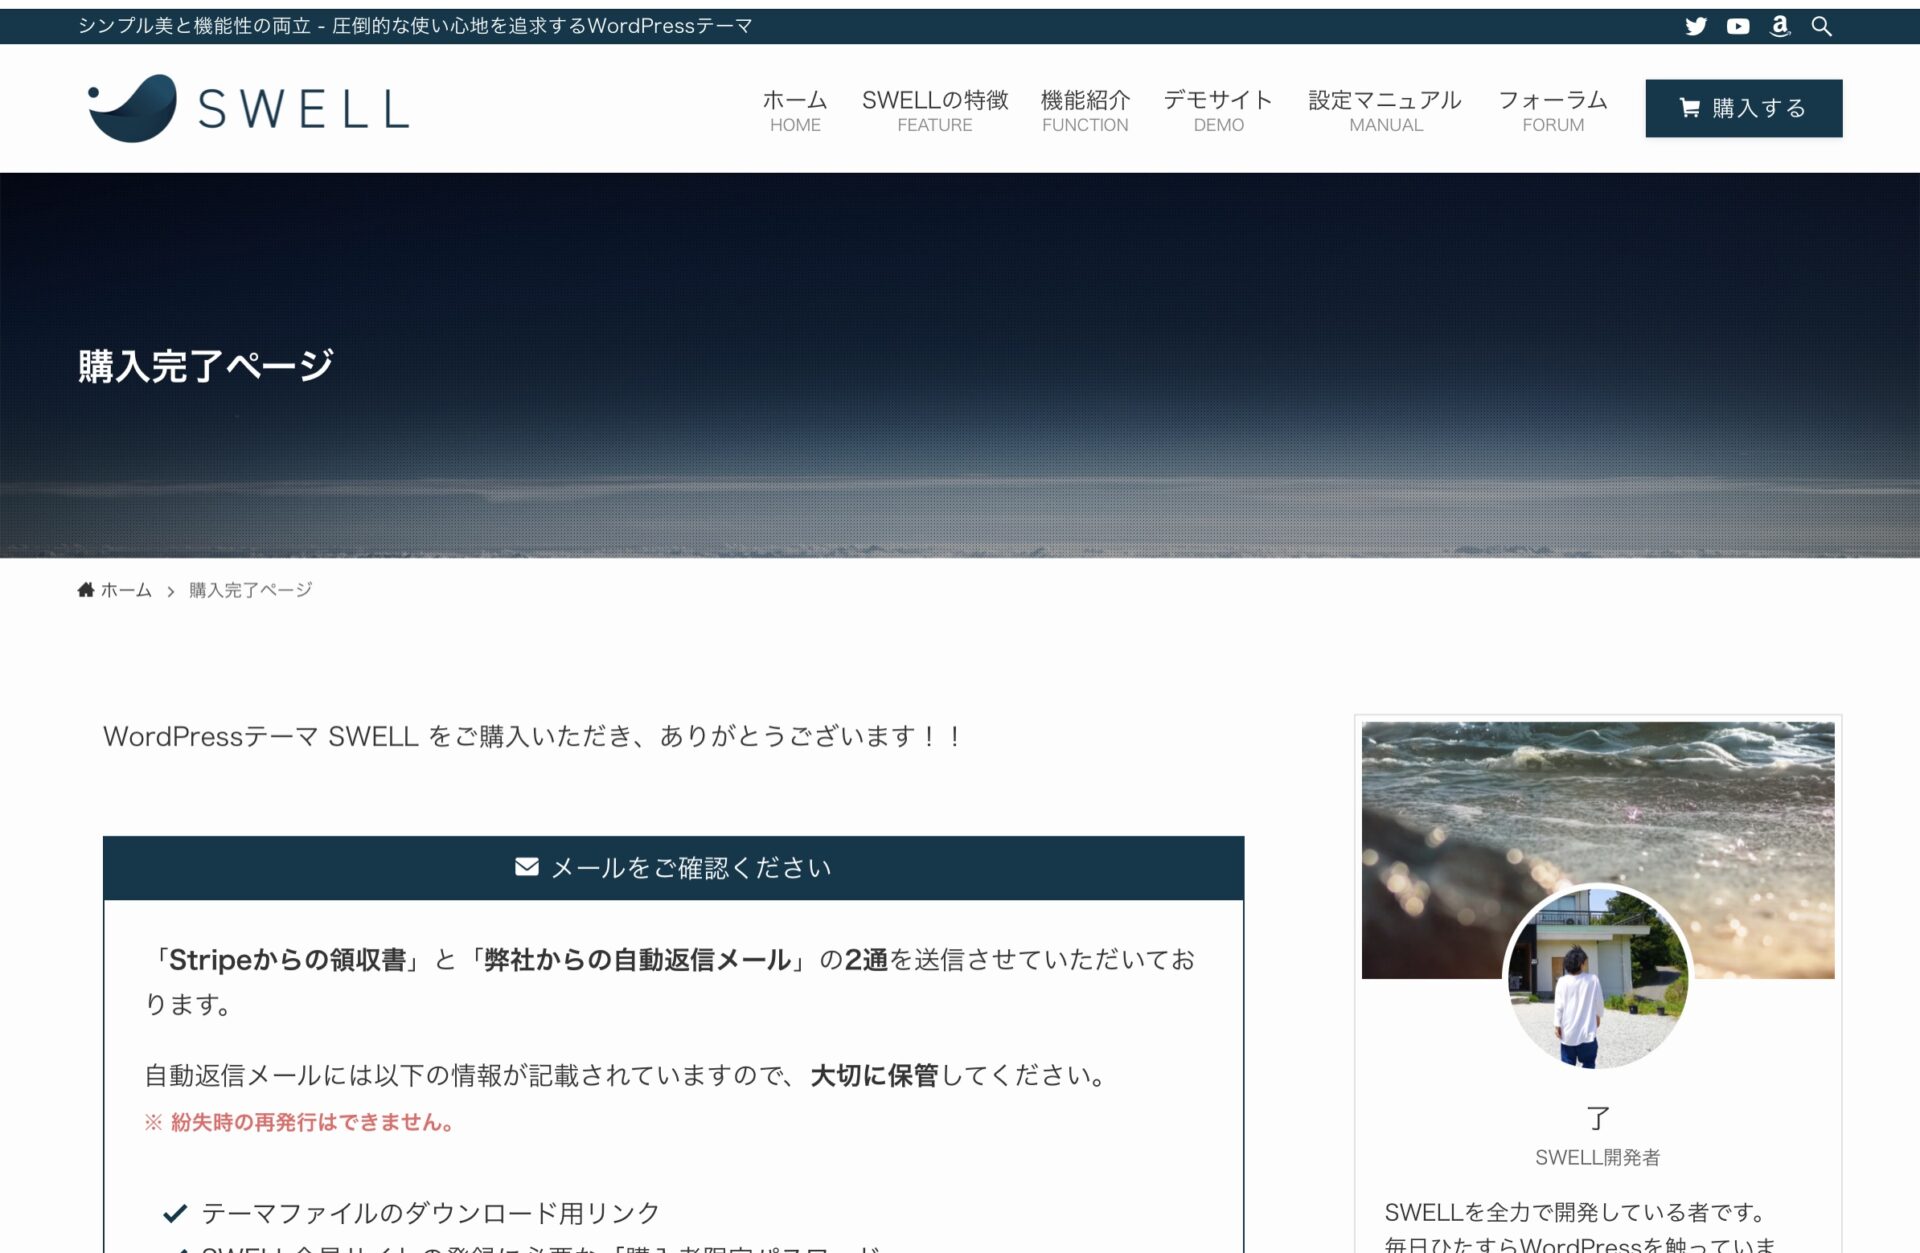 SWELL購入完了ページ